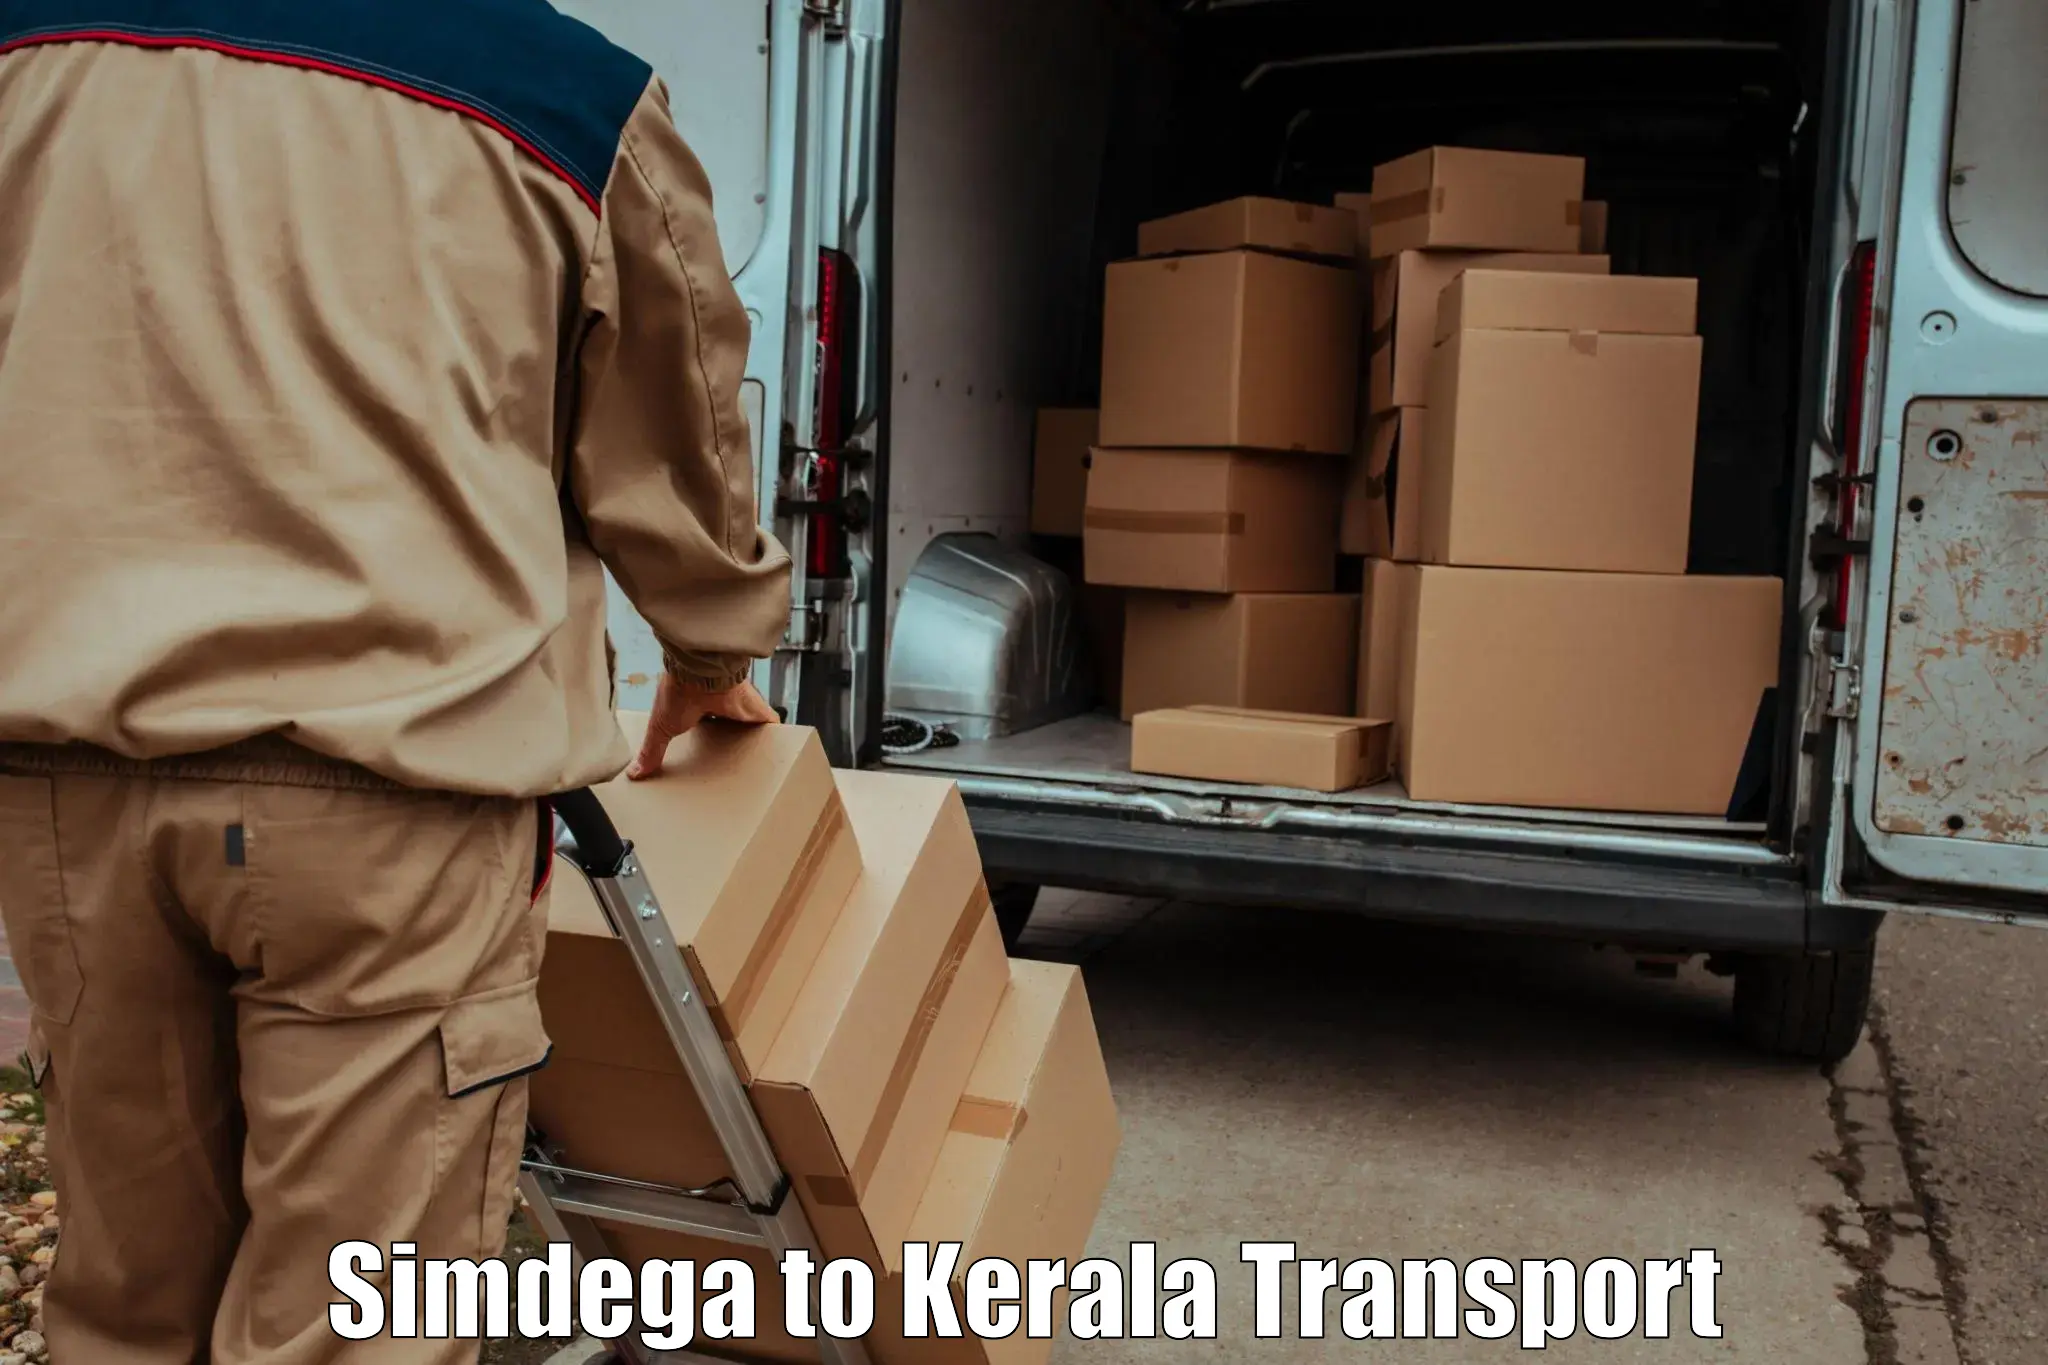 Delivery service Simdega to Nallepilly